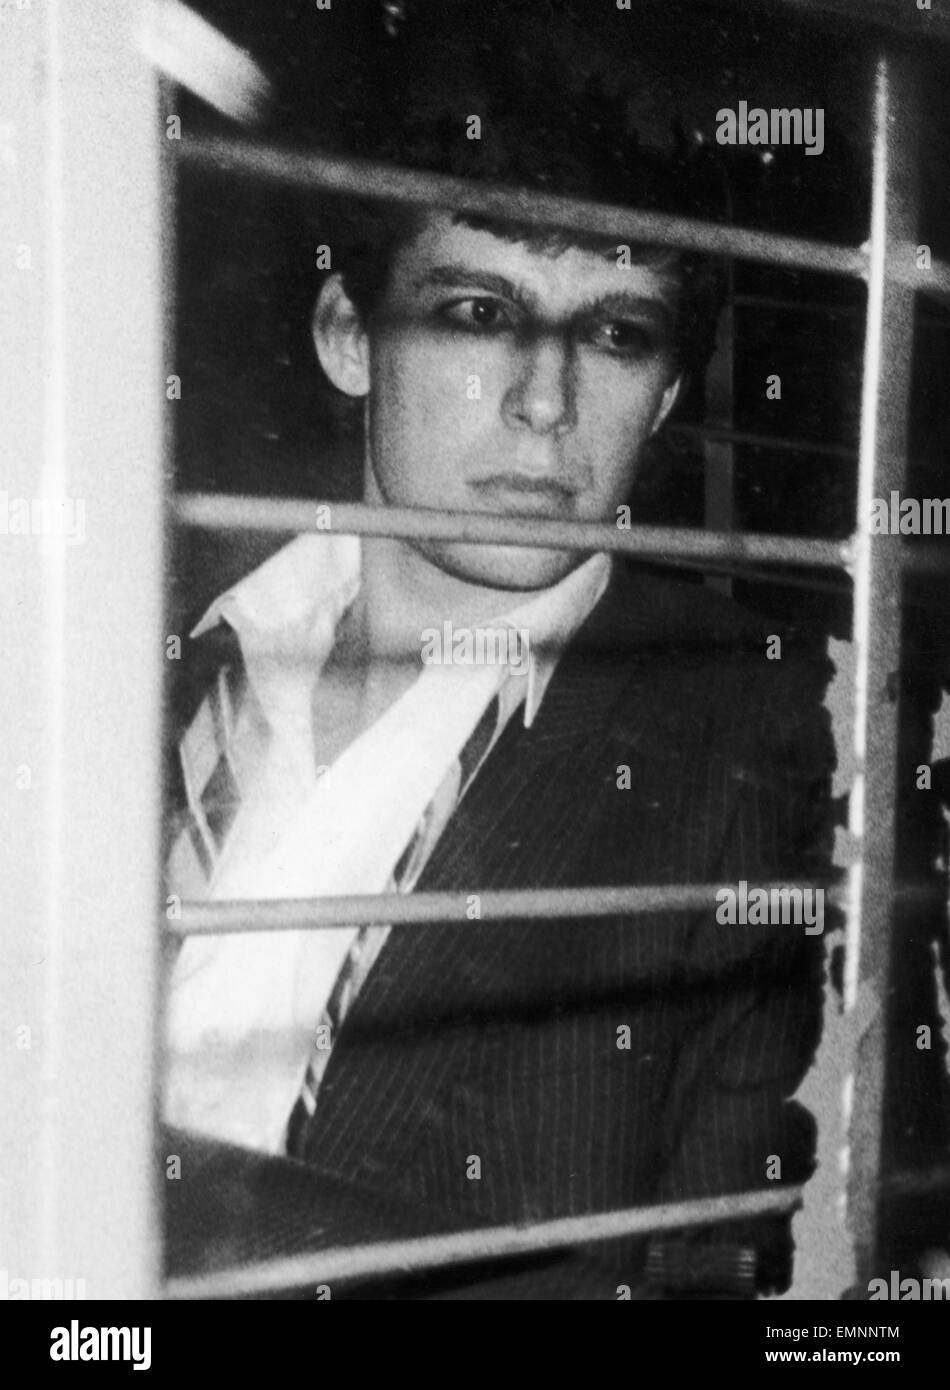 Jeremy Bamber 25 seen here leaving Chelmsford Crown Court after being found guilty of the murder of his adoptive parents, his sister Sheila and her six year old twins at the family farmhouse . Bamber must serve a minimum 25 years of a life sentence. 30th October 1986 DM86 5689 30a Stock Photo